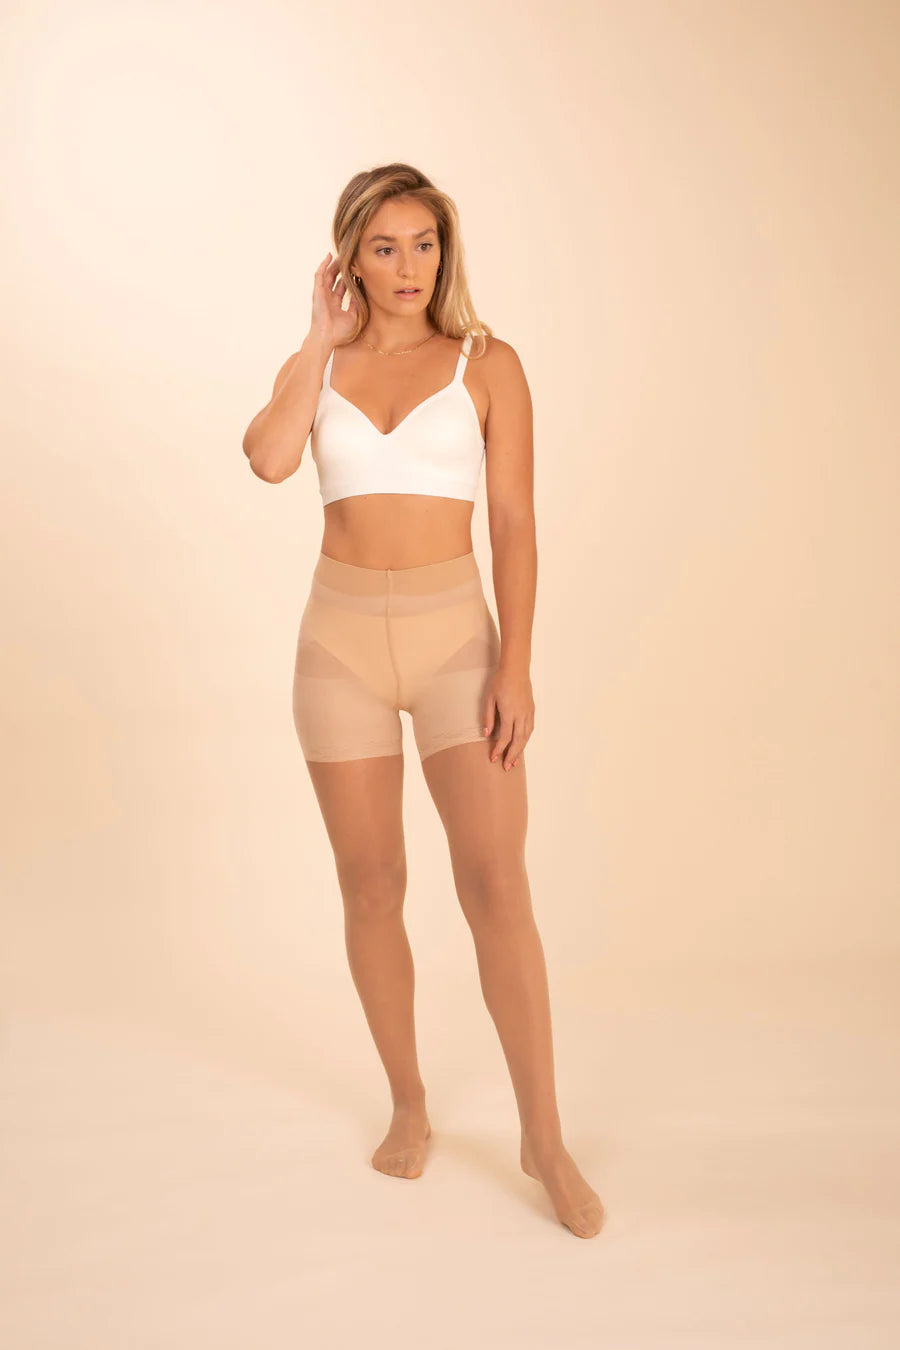 Sheer Contour Tights | Ivory